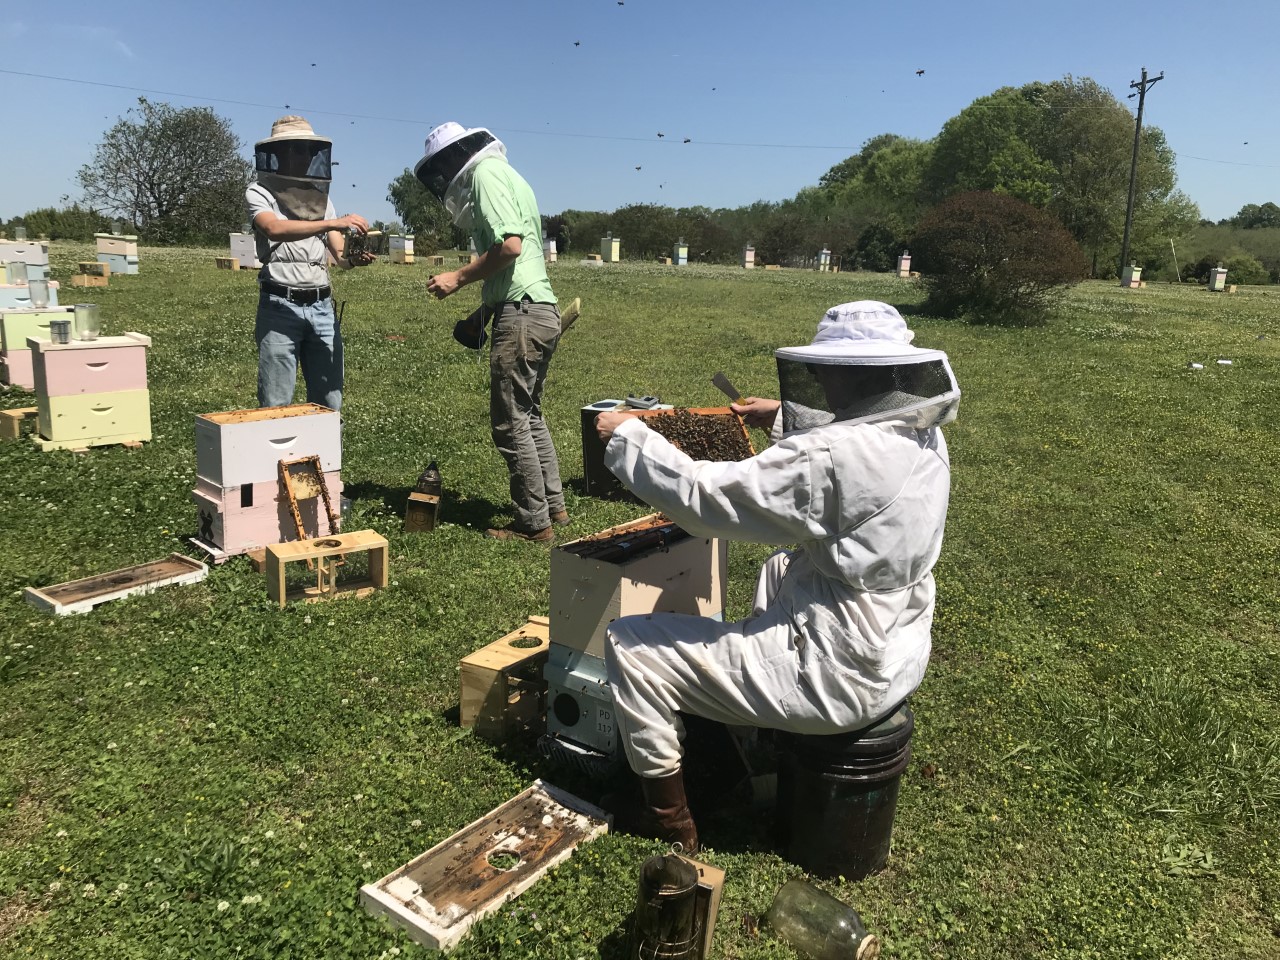 Three researchers wearing bee suits study hives in a field as honeybees fly overhead.